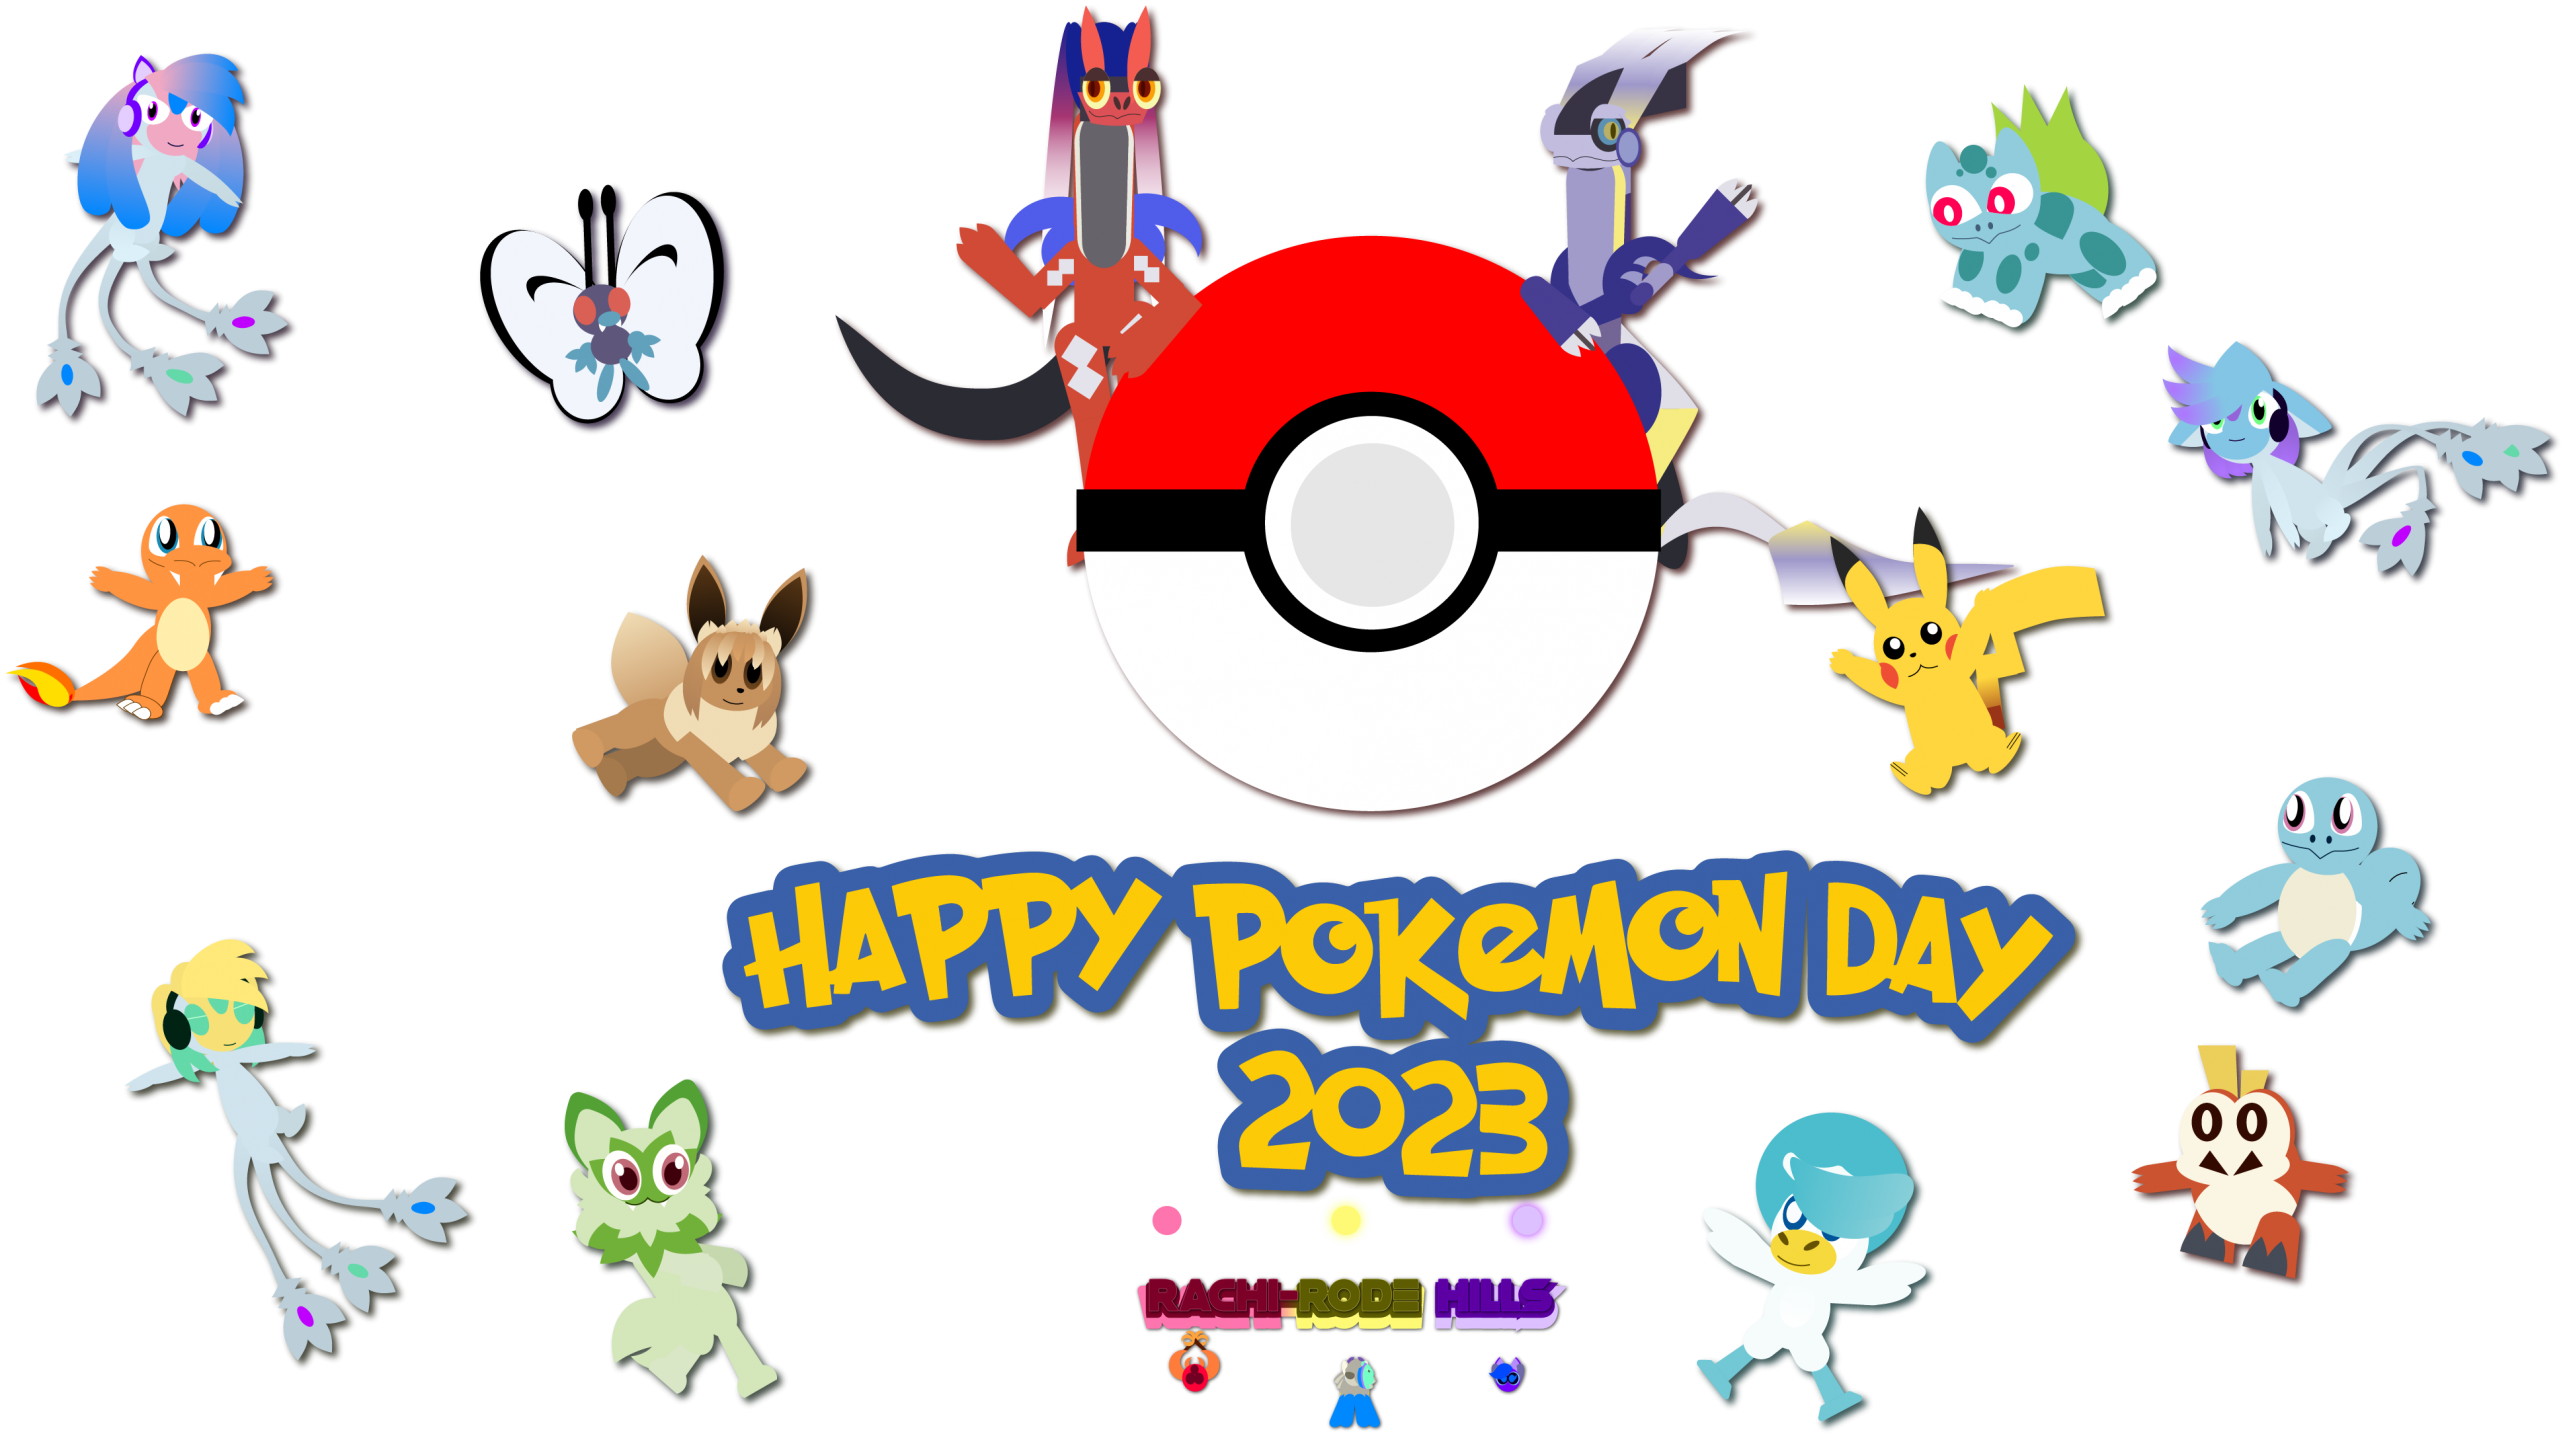 What Will Be Announced On Pokémon Day 2023?